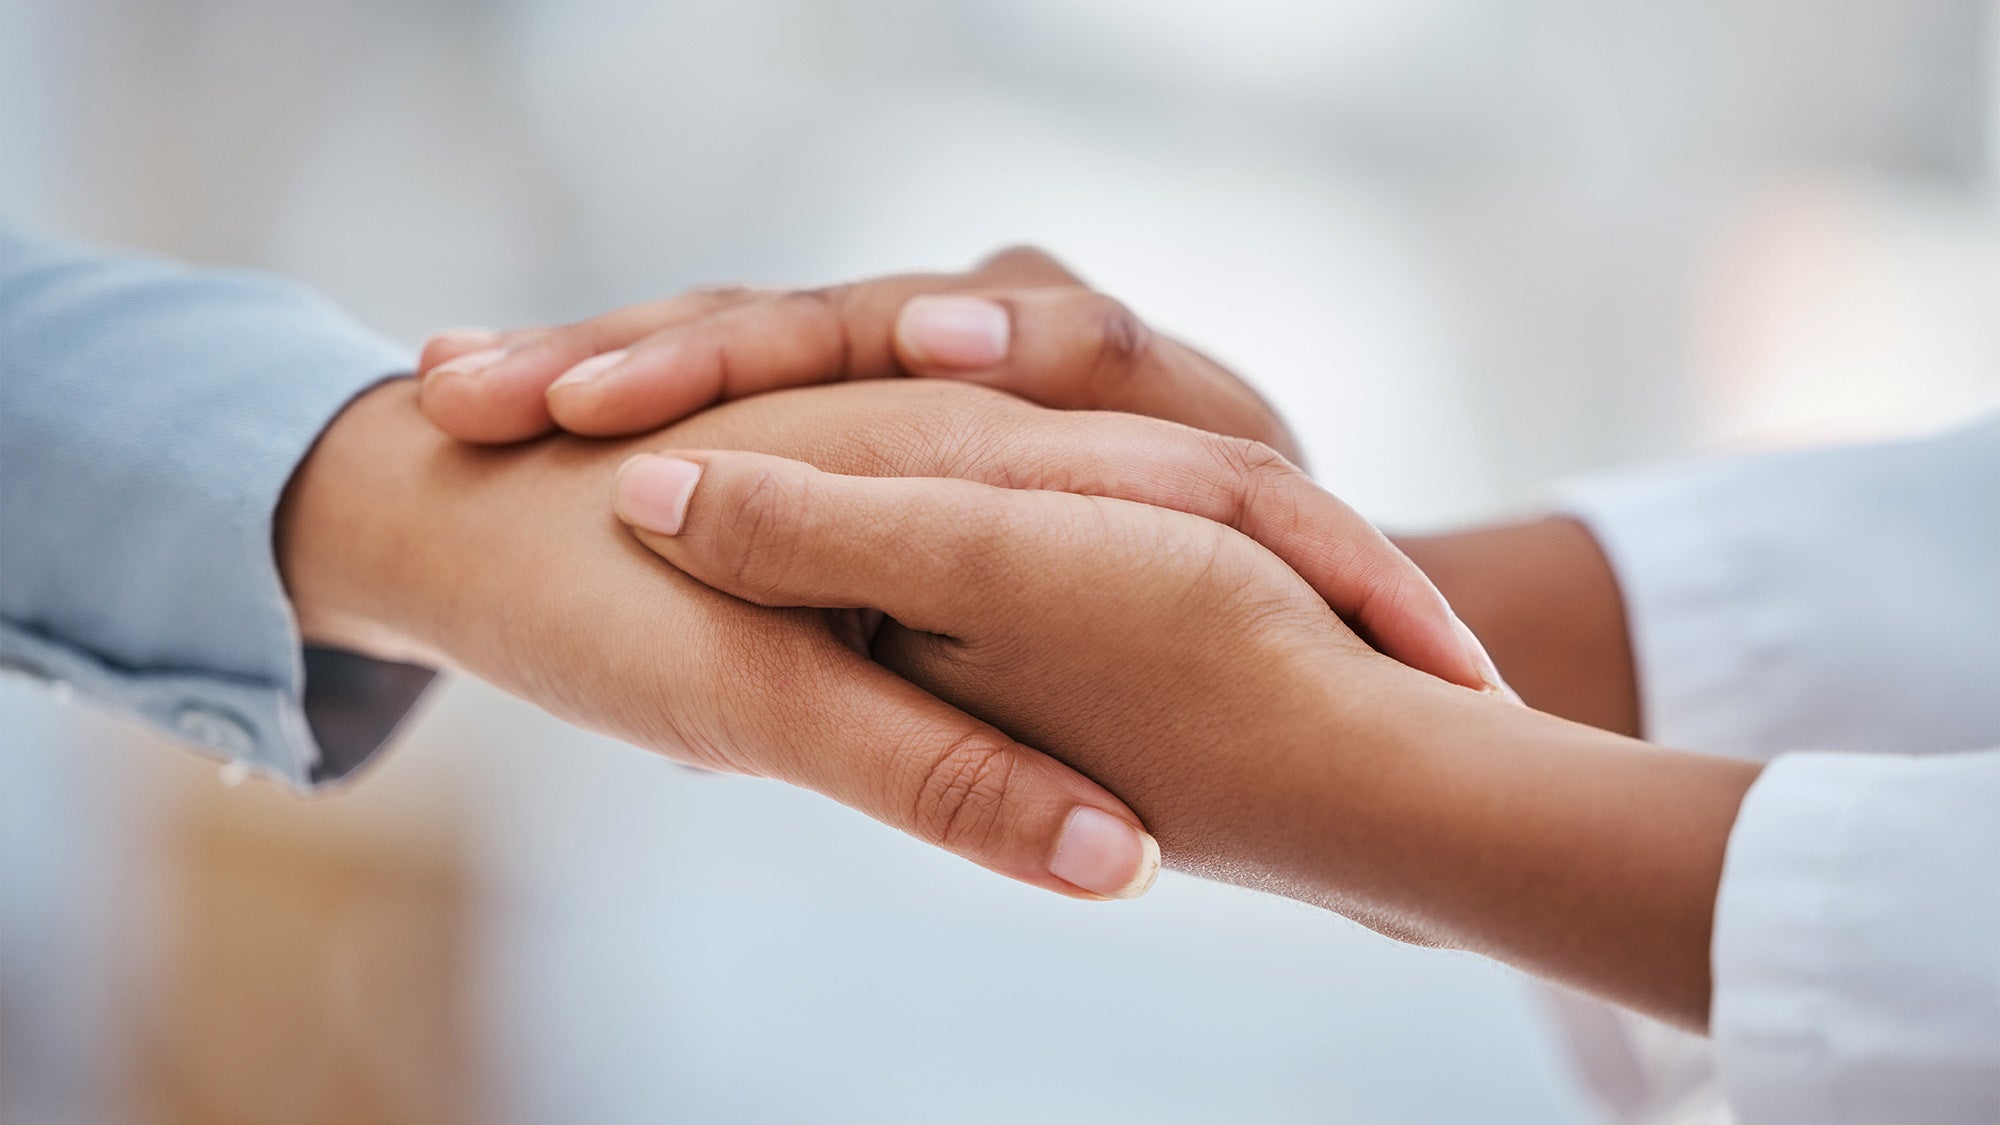 A person's hands hold a another person's hand in a gesture of comfort